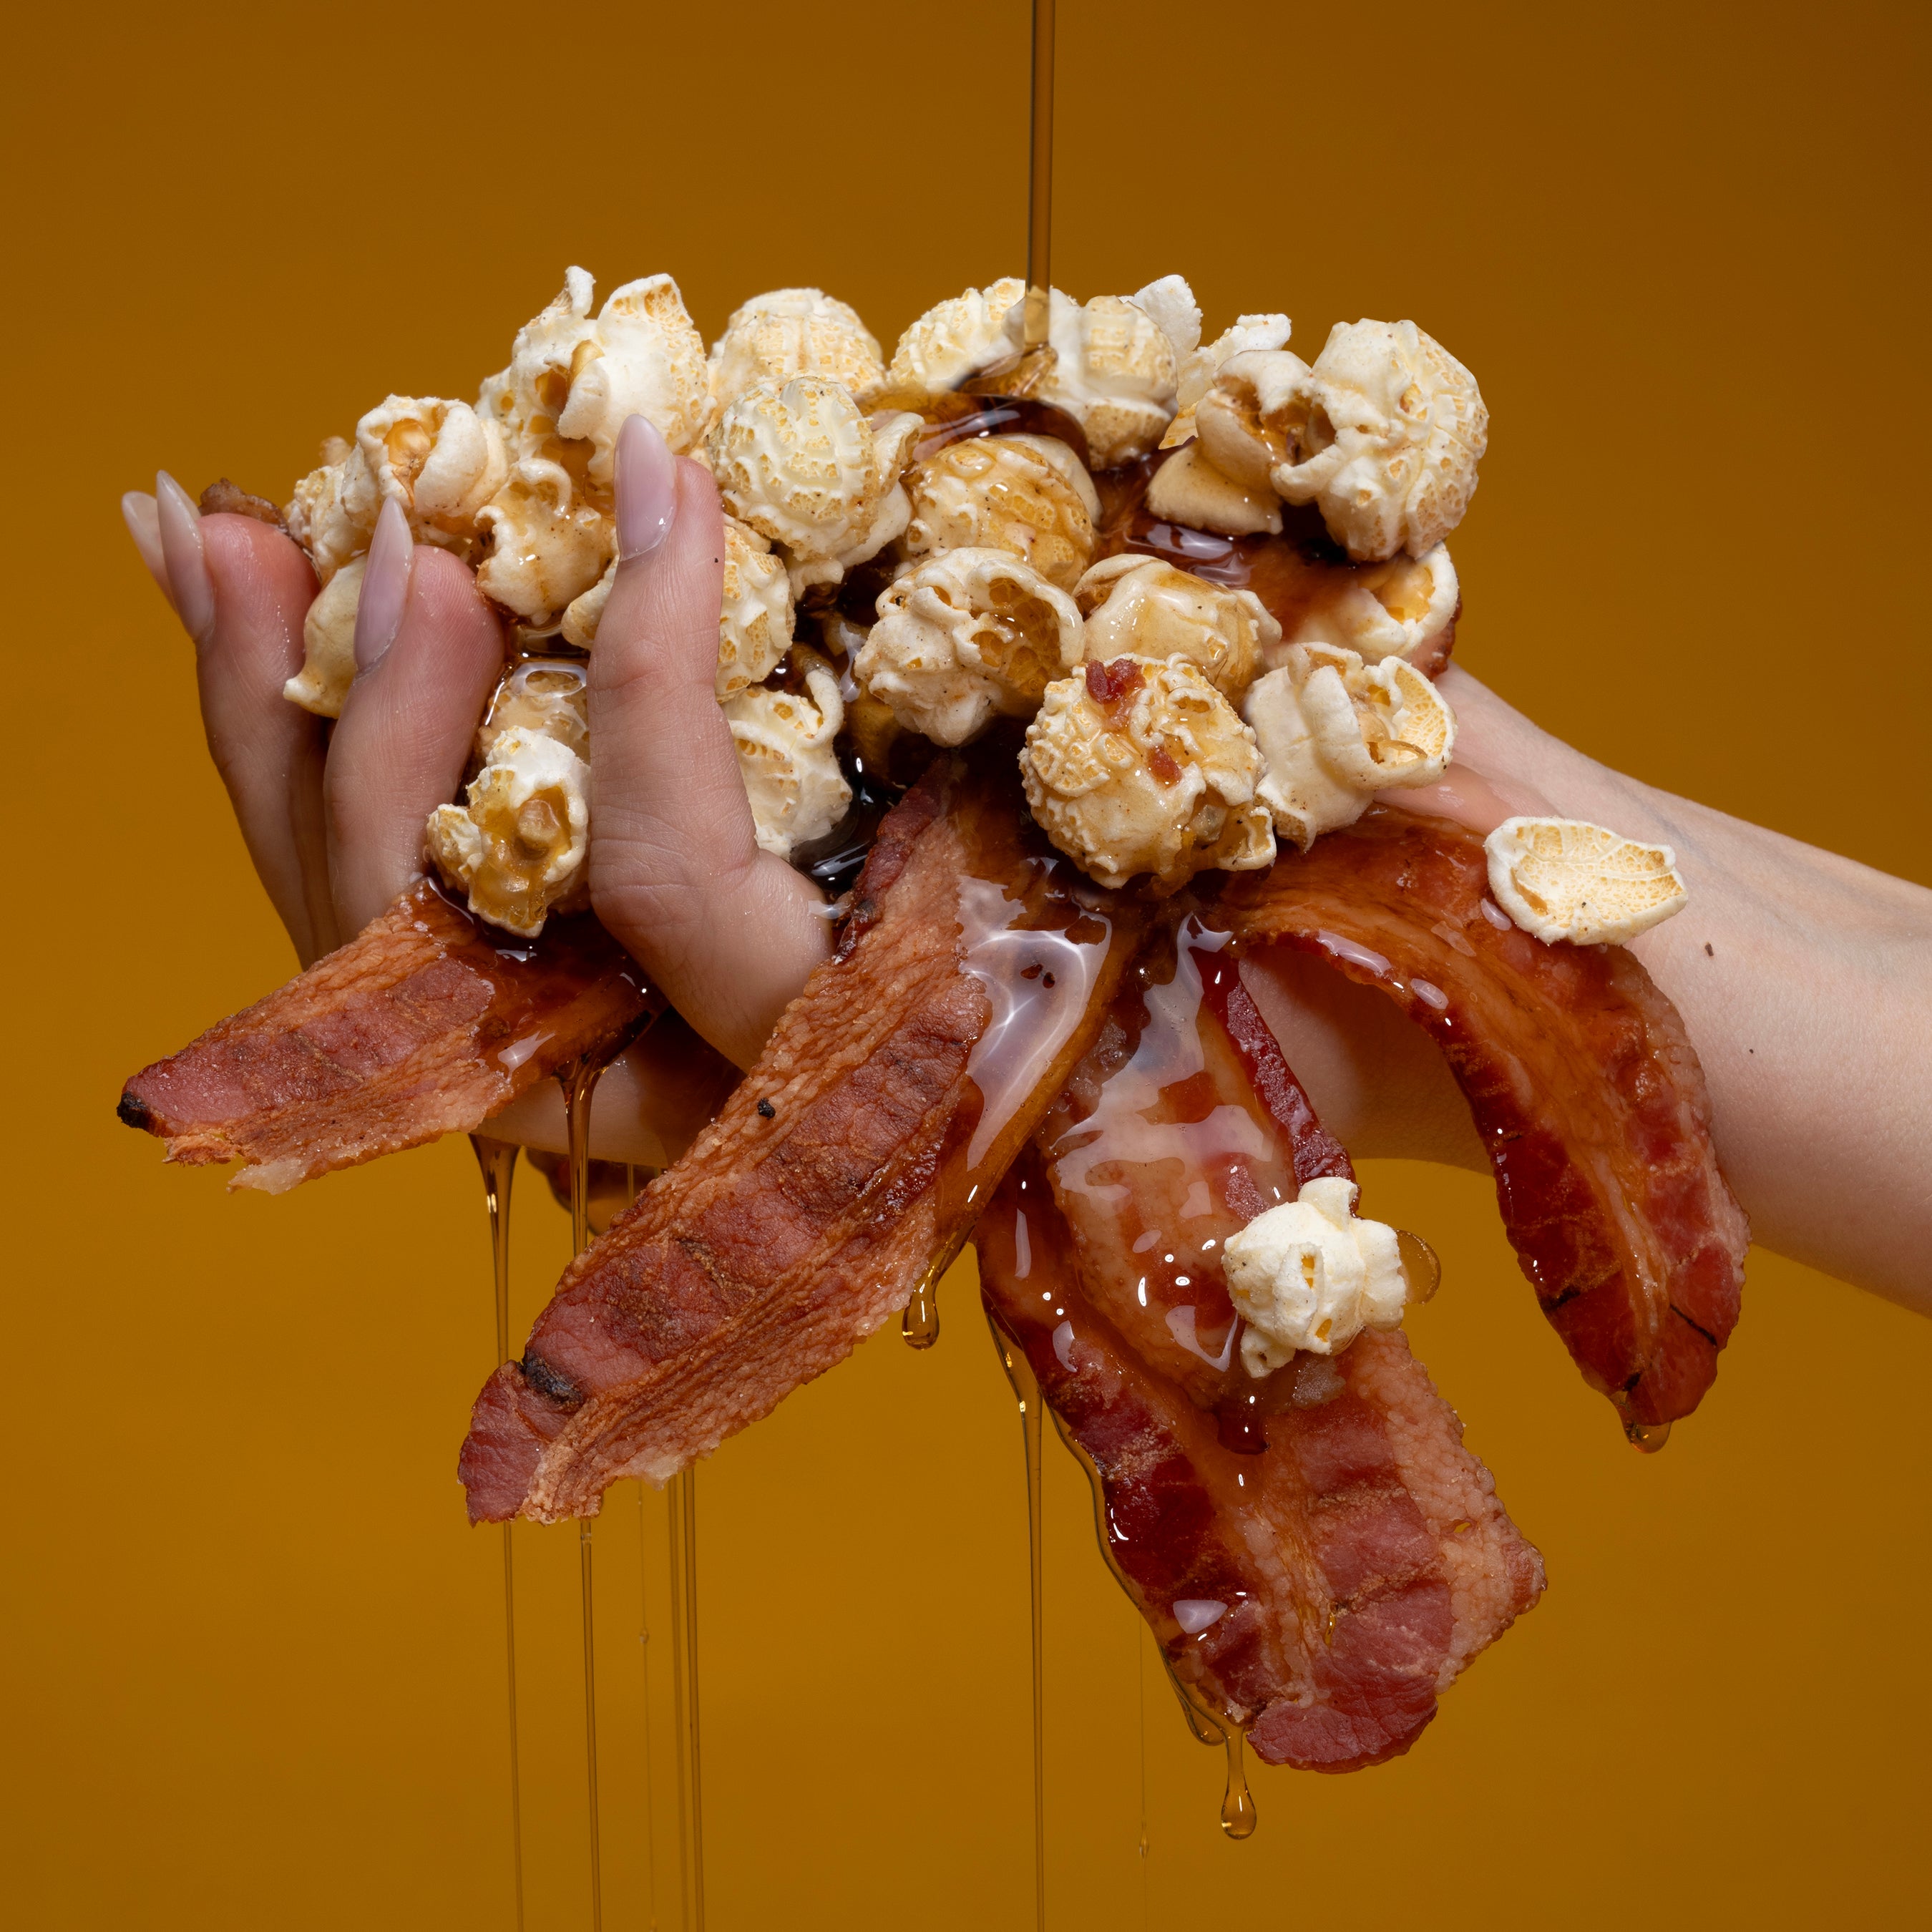 Bacon covered in Popcorn and Maple Syrup